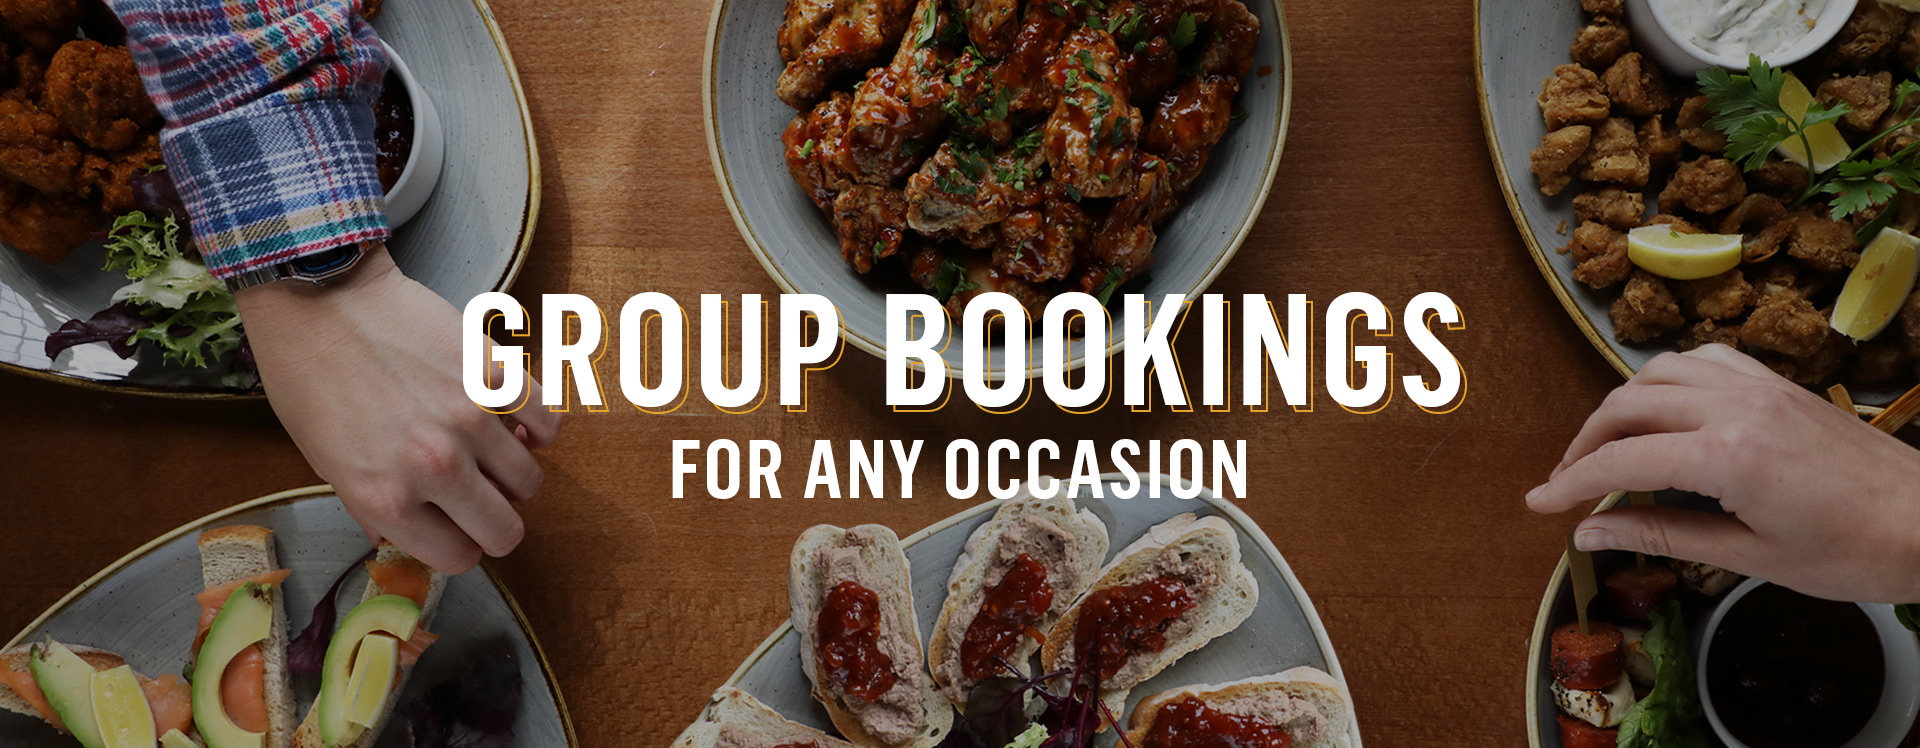 Group Bookings at The Old White Swan